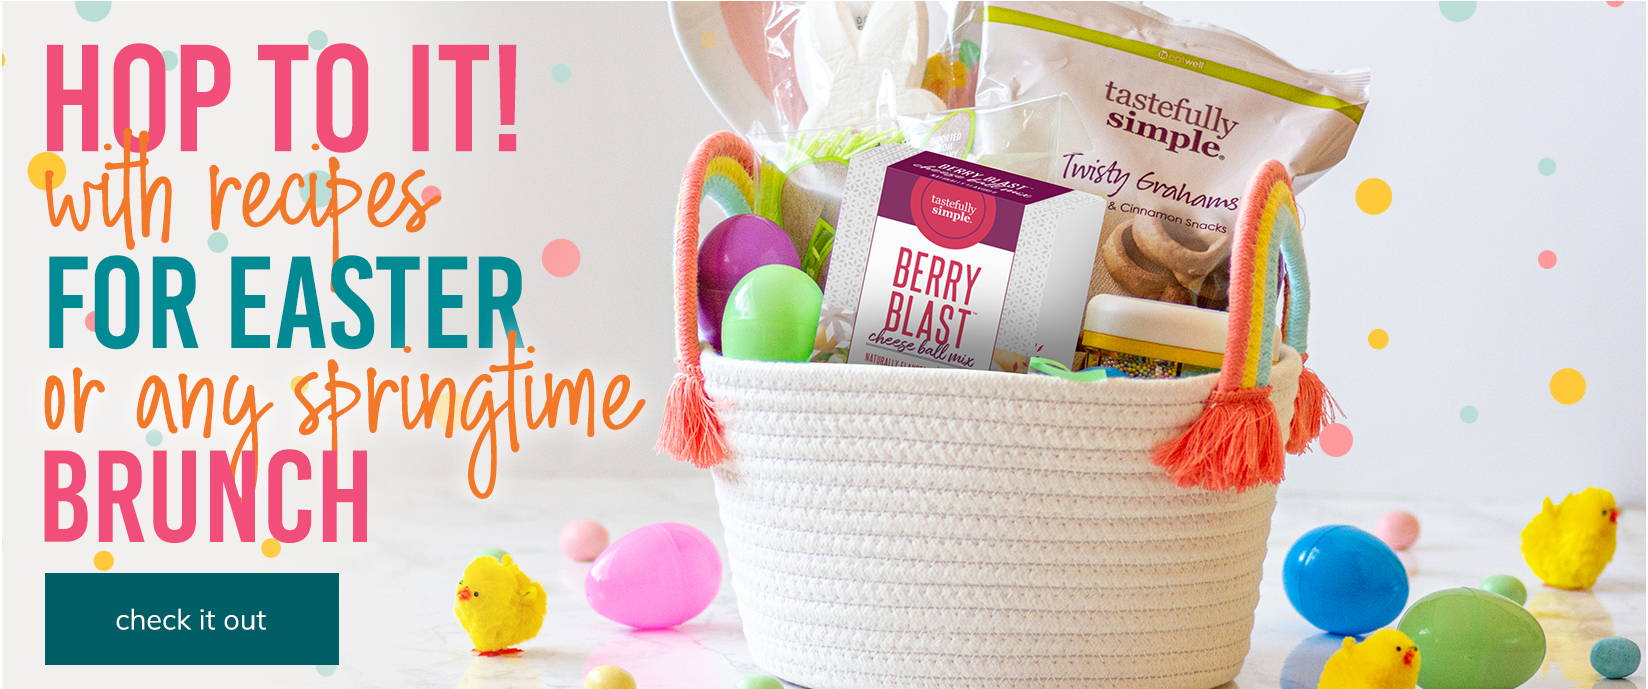 hop to it! with recipes for easter or any springtime brunch | check it out